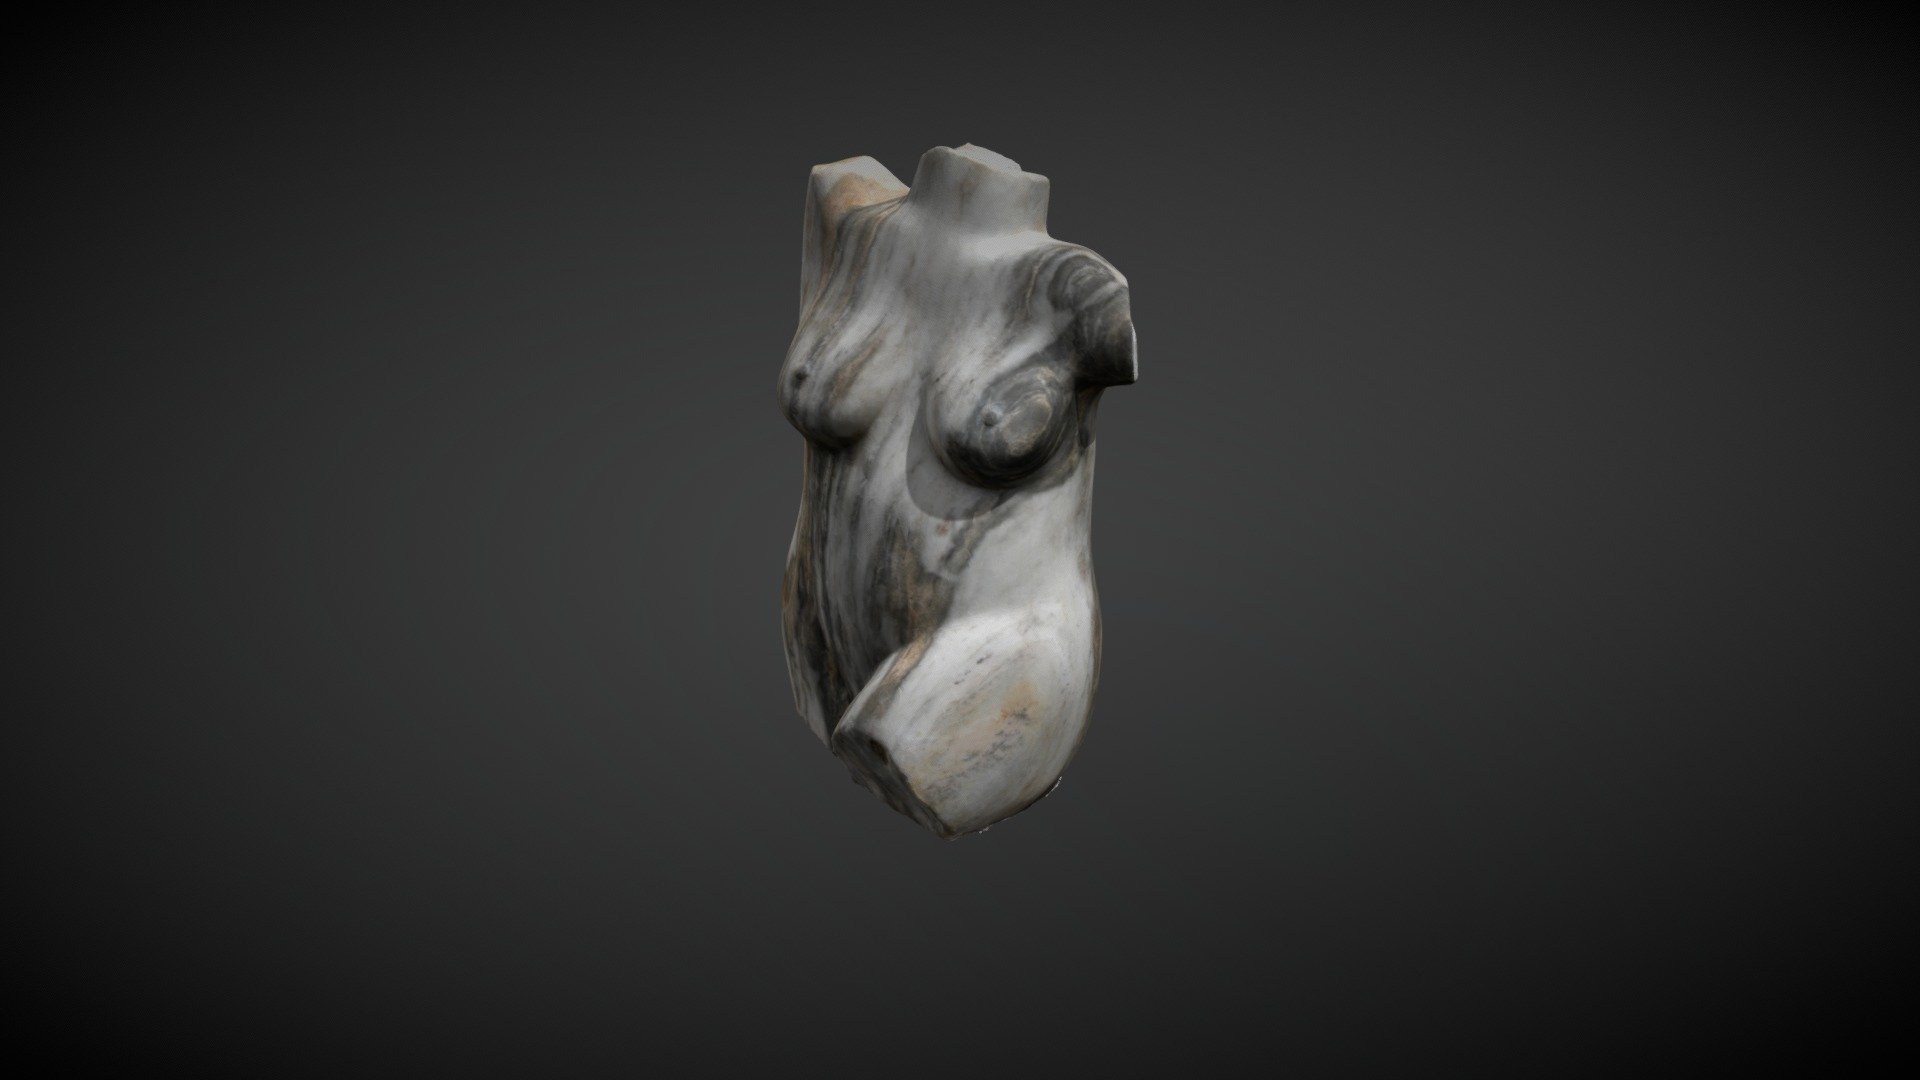 Torso sculpture made out of stone by artist and realized into 3D model. For more information message me or visit Logniture.com - Woman Torso Sculpture in Stone - Buy Royalty Free 3D model by Logniture 3d model